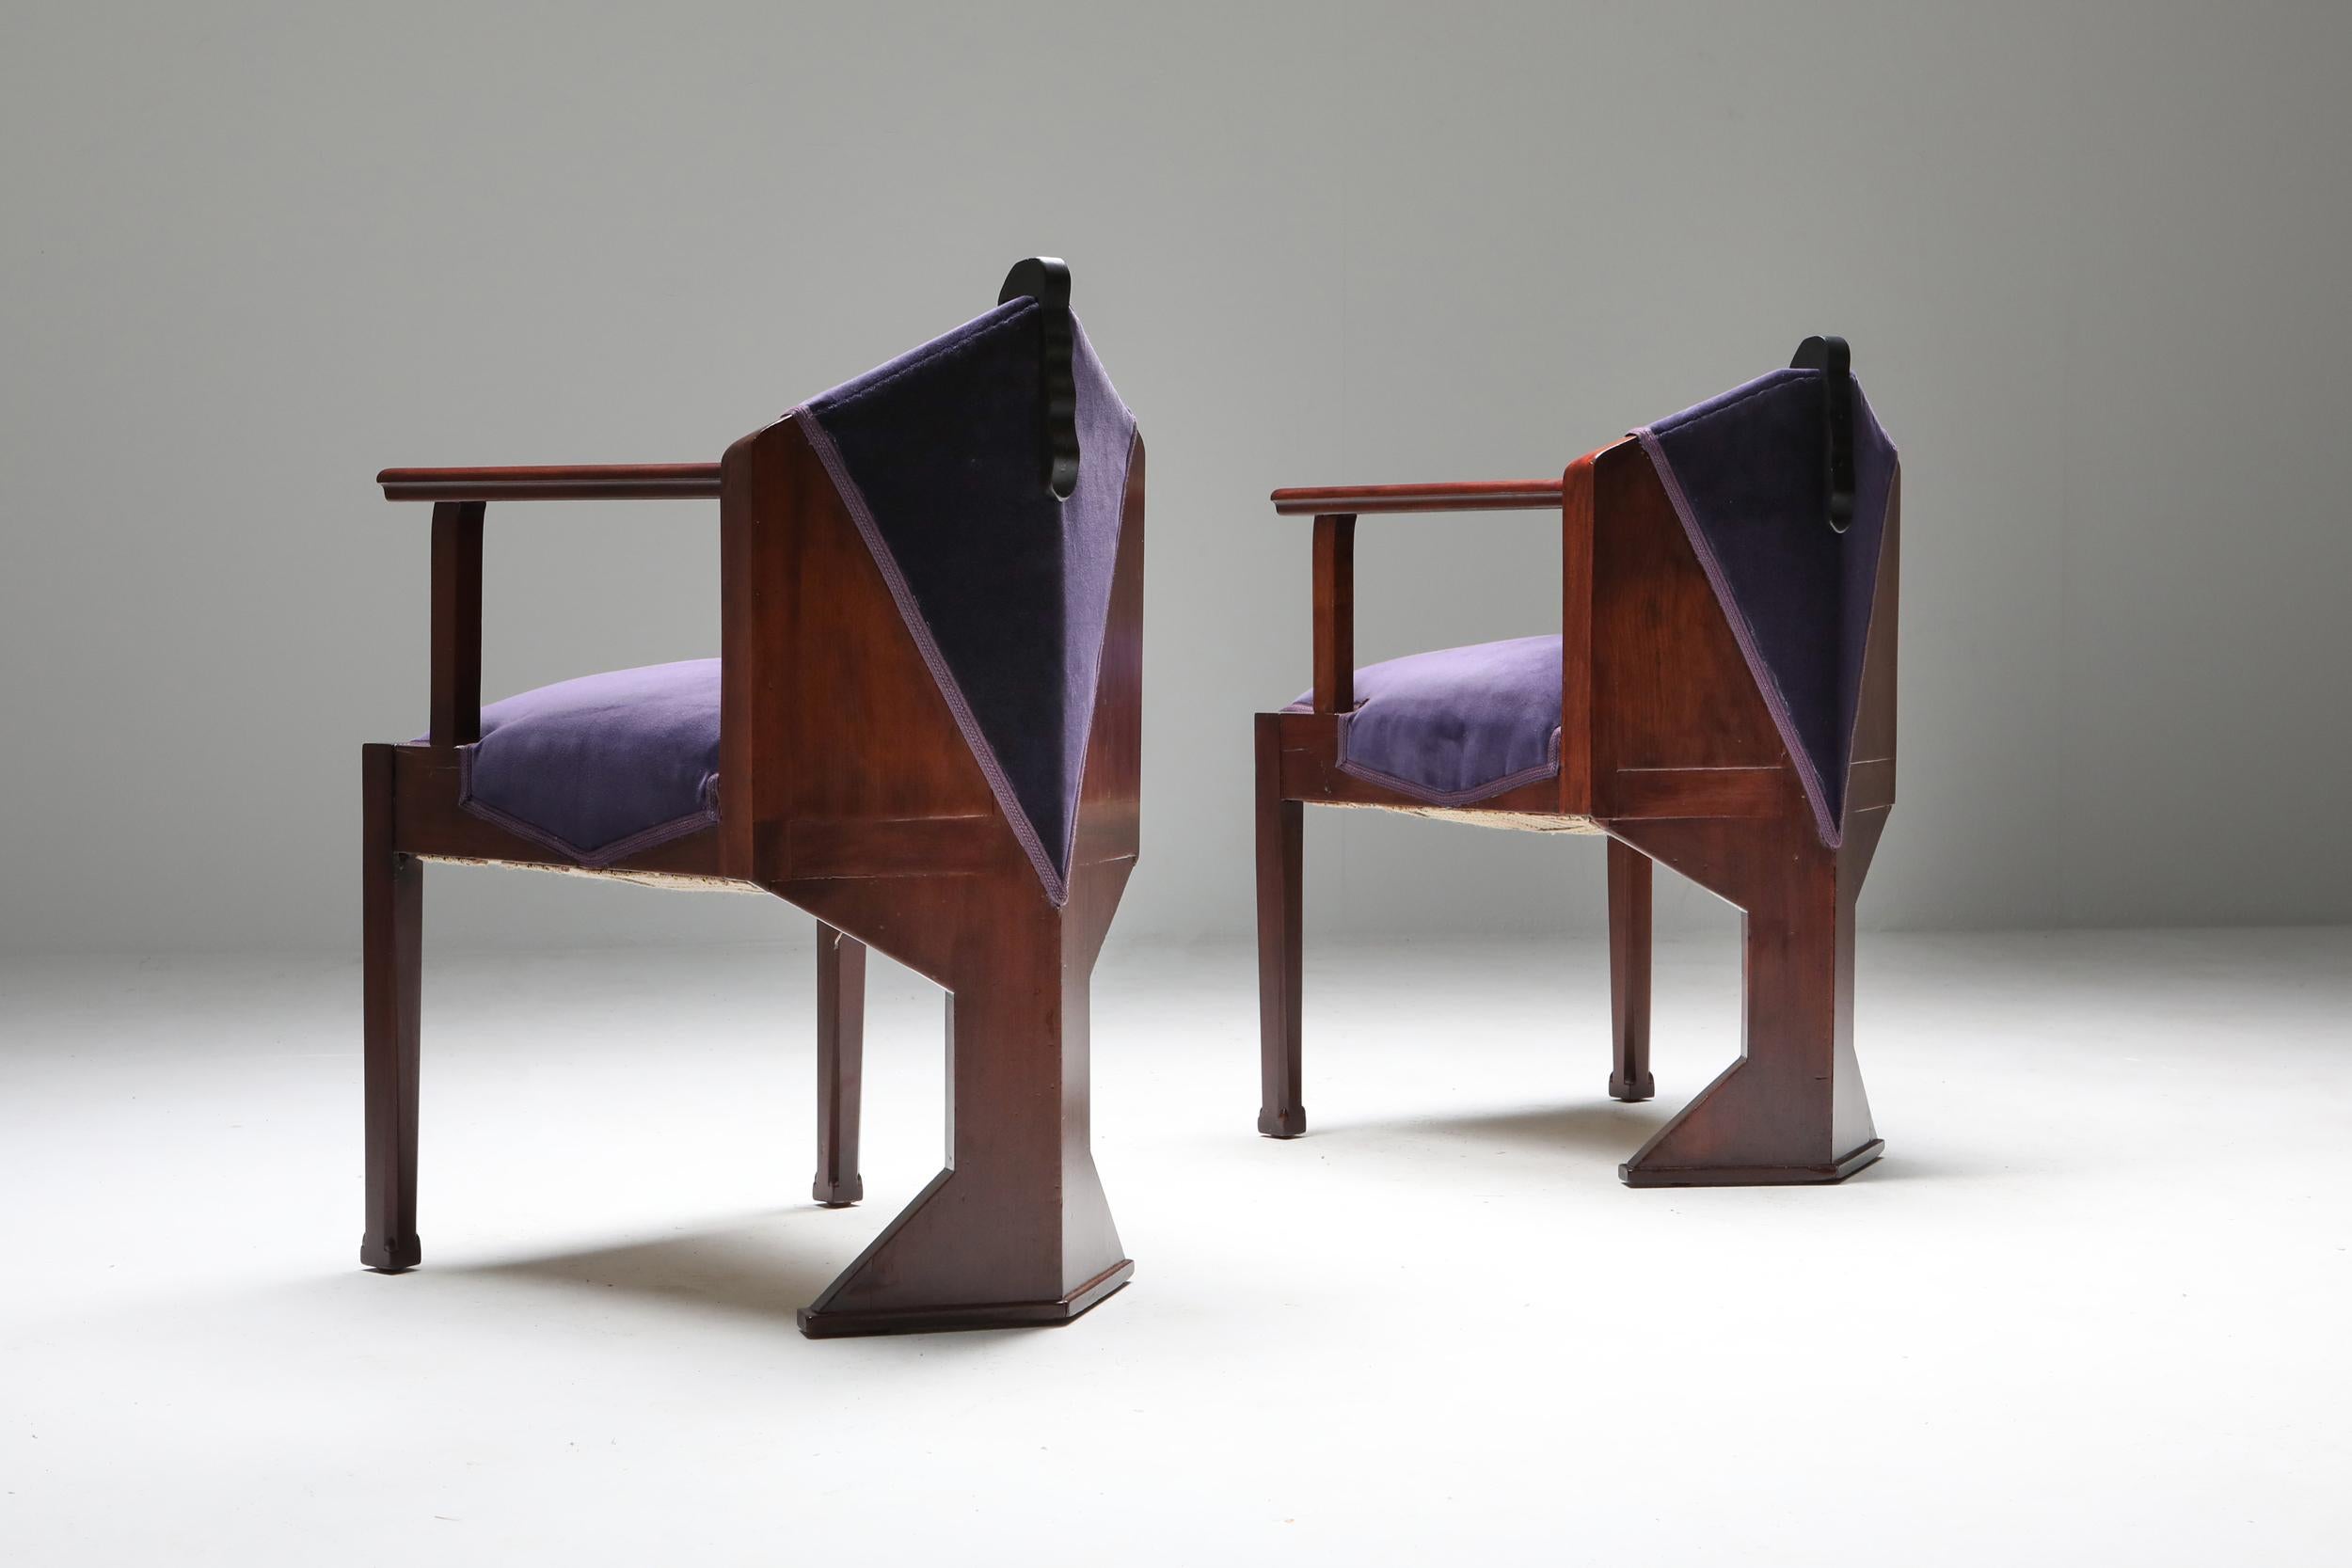 20th Century Art Deco ‘Amsterdamse school’ Armchairs, Netherlands, 1950s For Sale